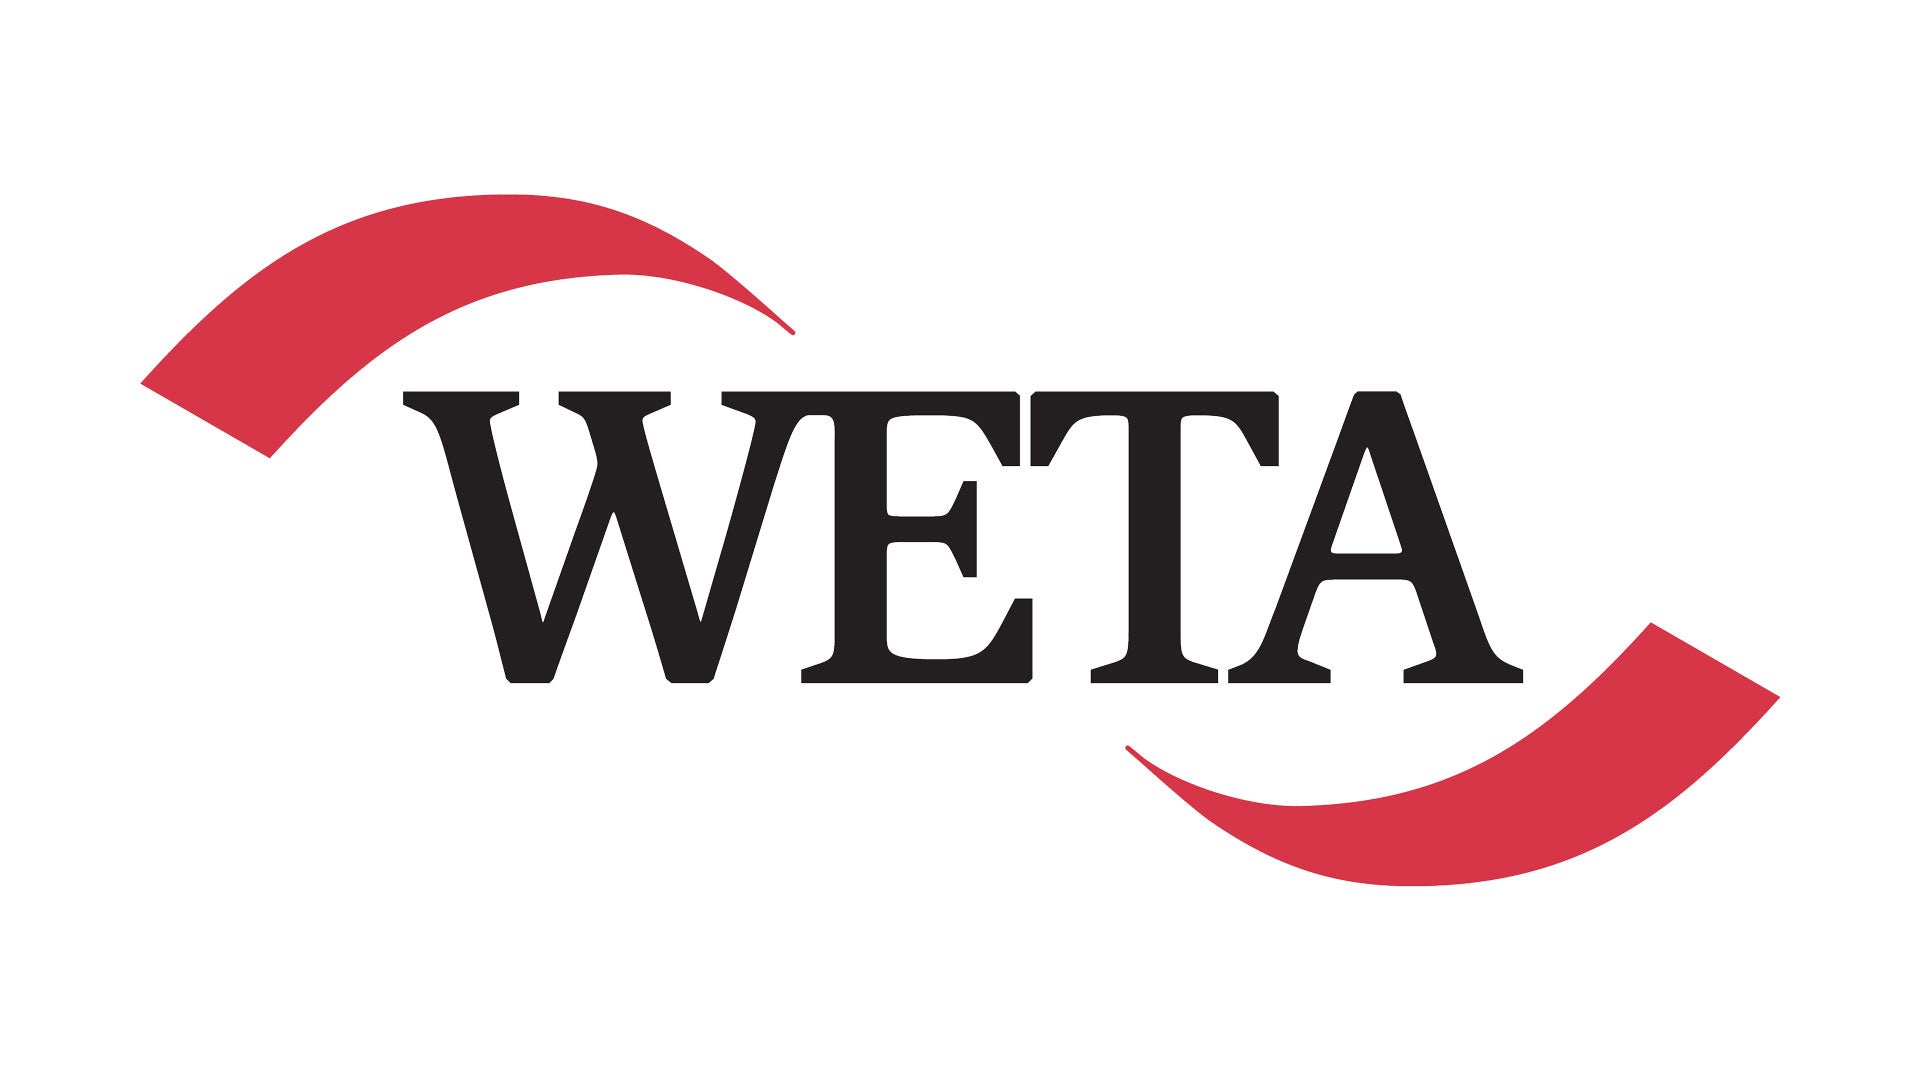 More Ways to Give | WETA